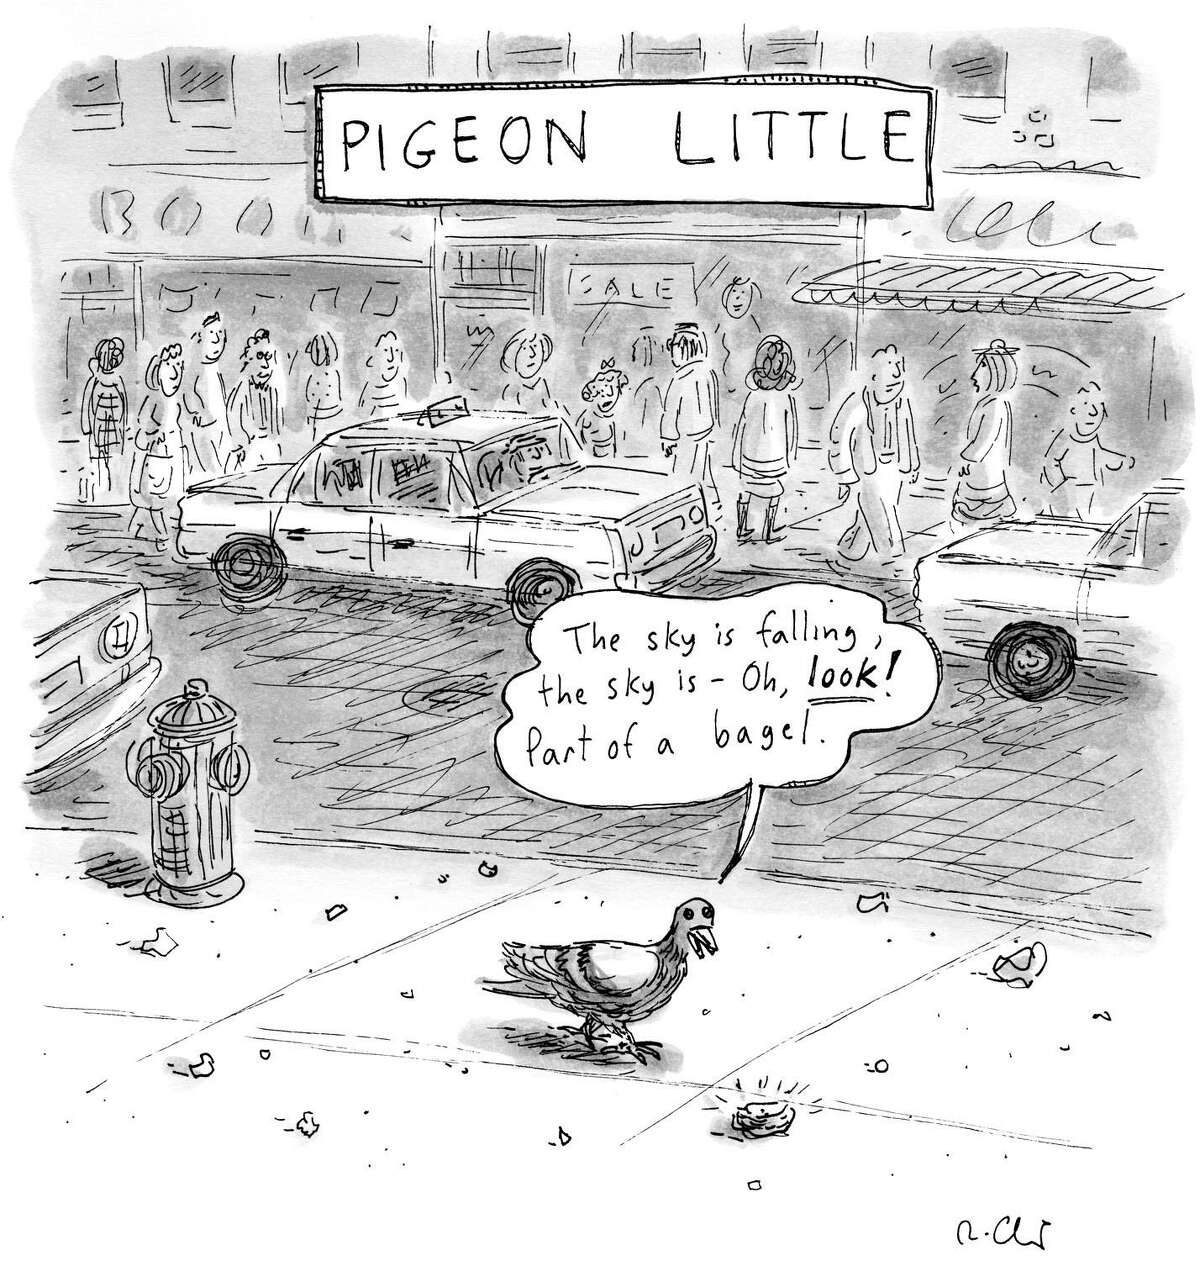 Roz Chast, a cartoonist whose work has been featured in The New Yorker and other publications, is appearing at Carol Corey Fine Art in Kent Aug. 14.